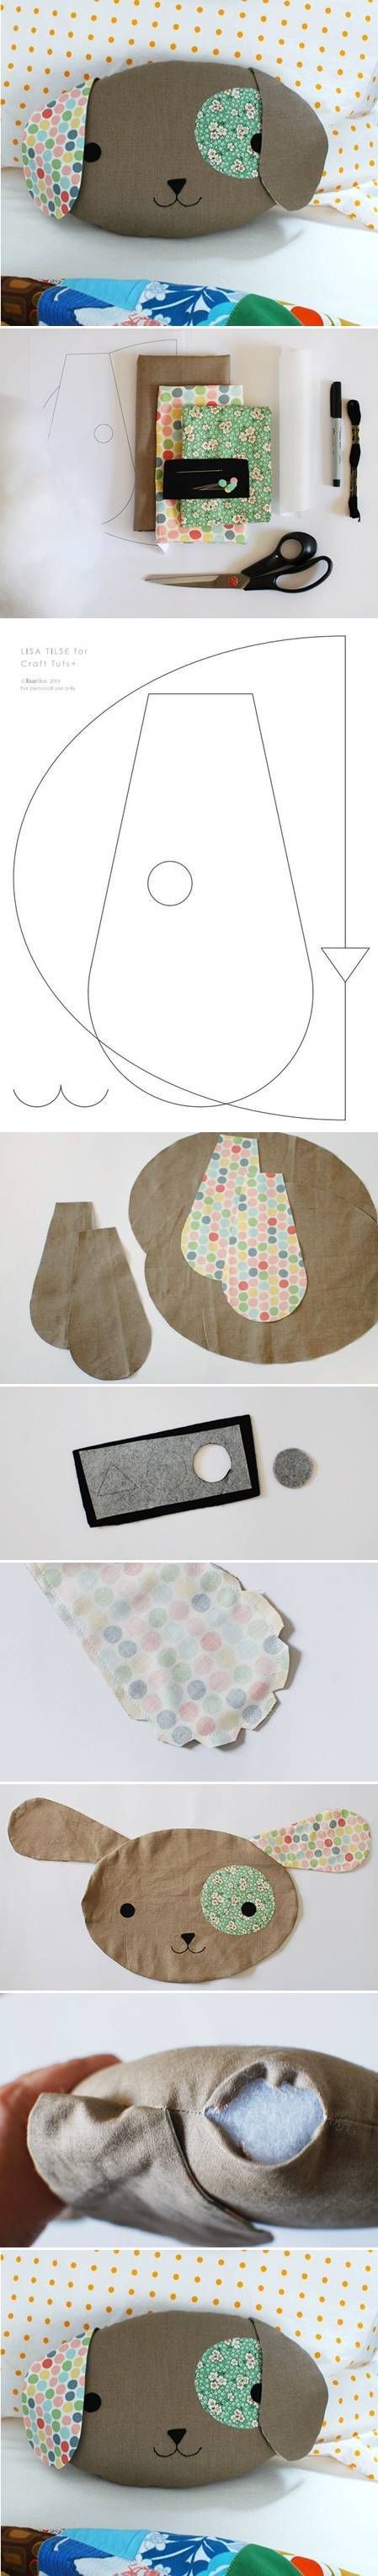 DIY Cute Puppy Pillow DIY Projects